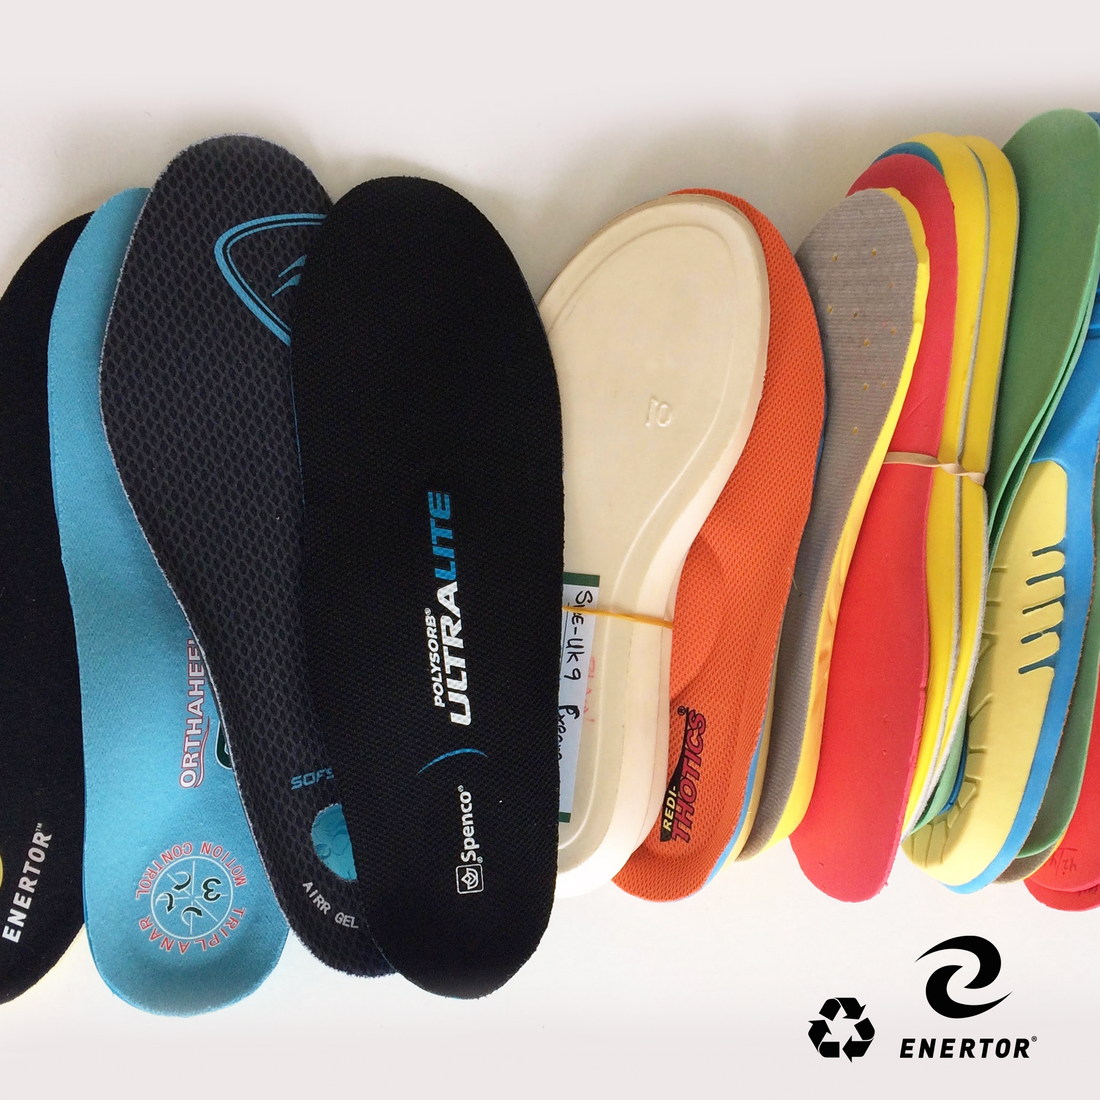 Insoles ready for recycling with Enertor's recycling scheme for insole shoe insers